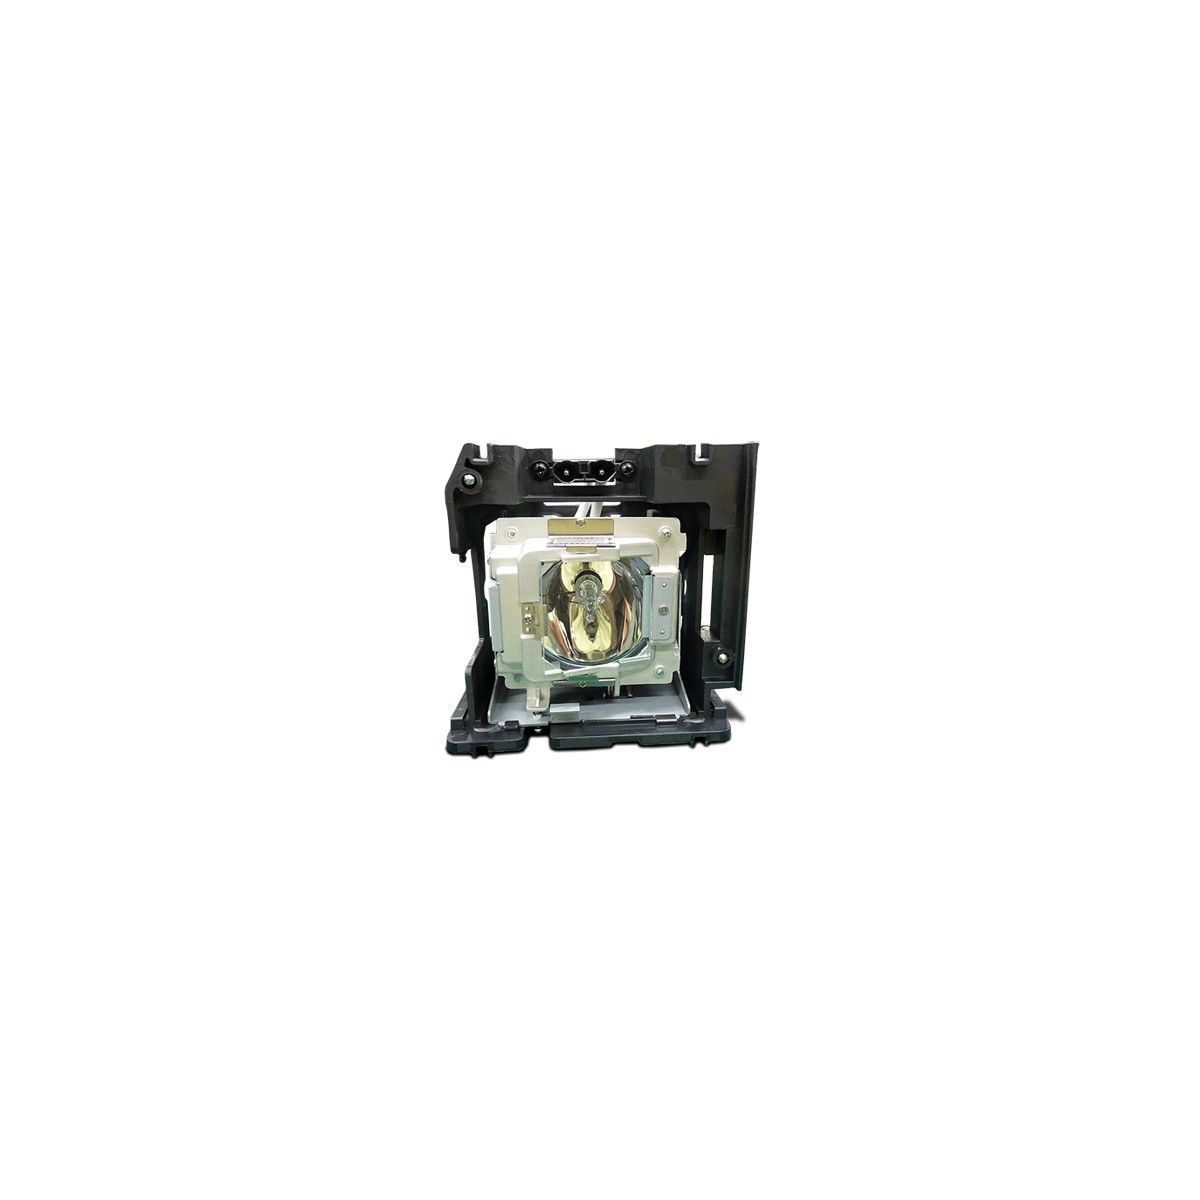 InFocus Replacement Lamp for - IN5312 - IN5314 - IN5316HD - IN5318 - 330 W - 1500 h - Infocus - IN5312 - IN5314